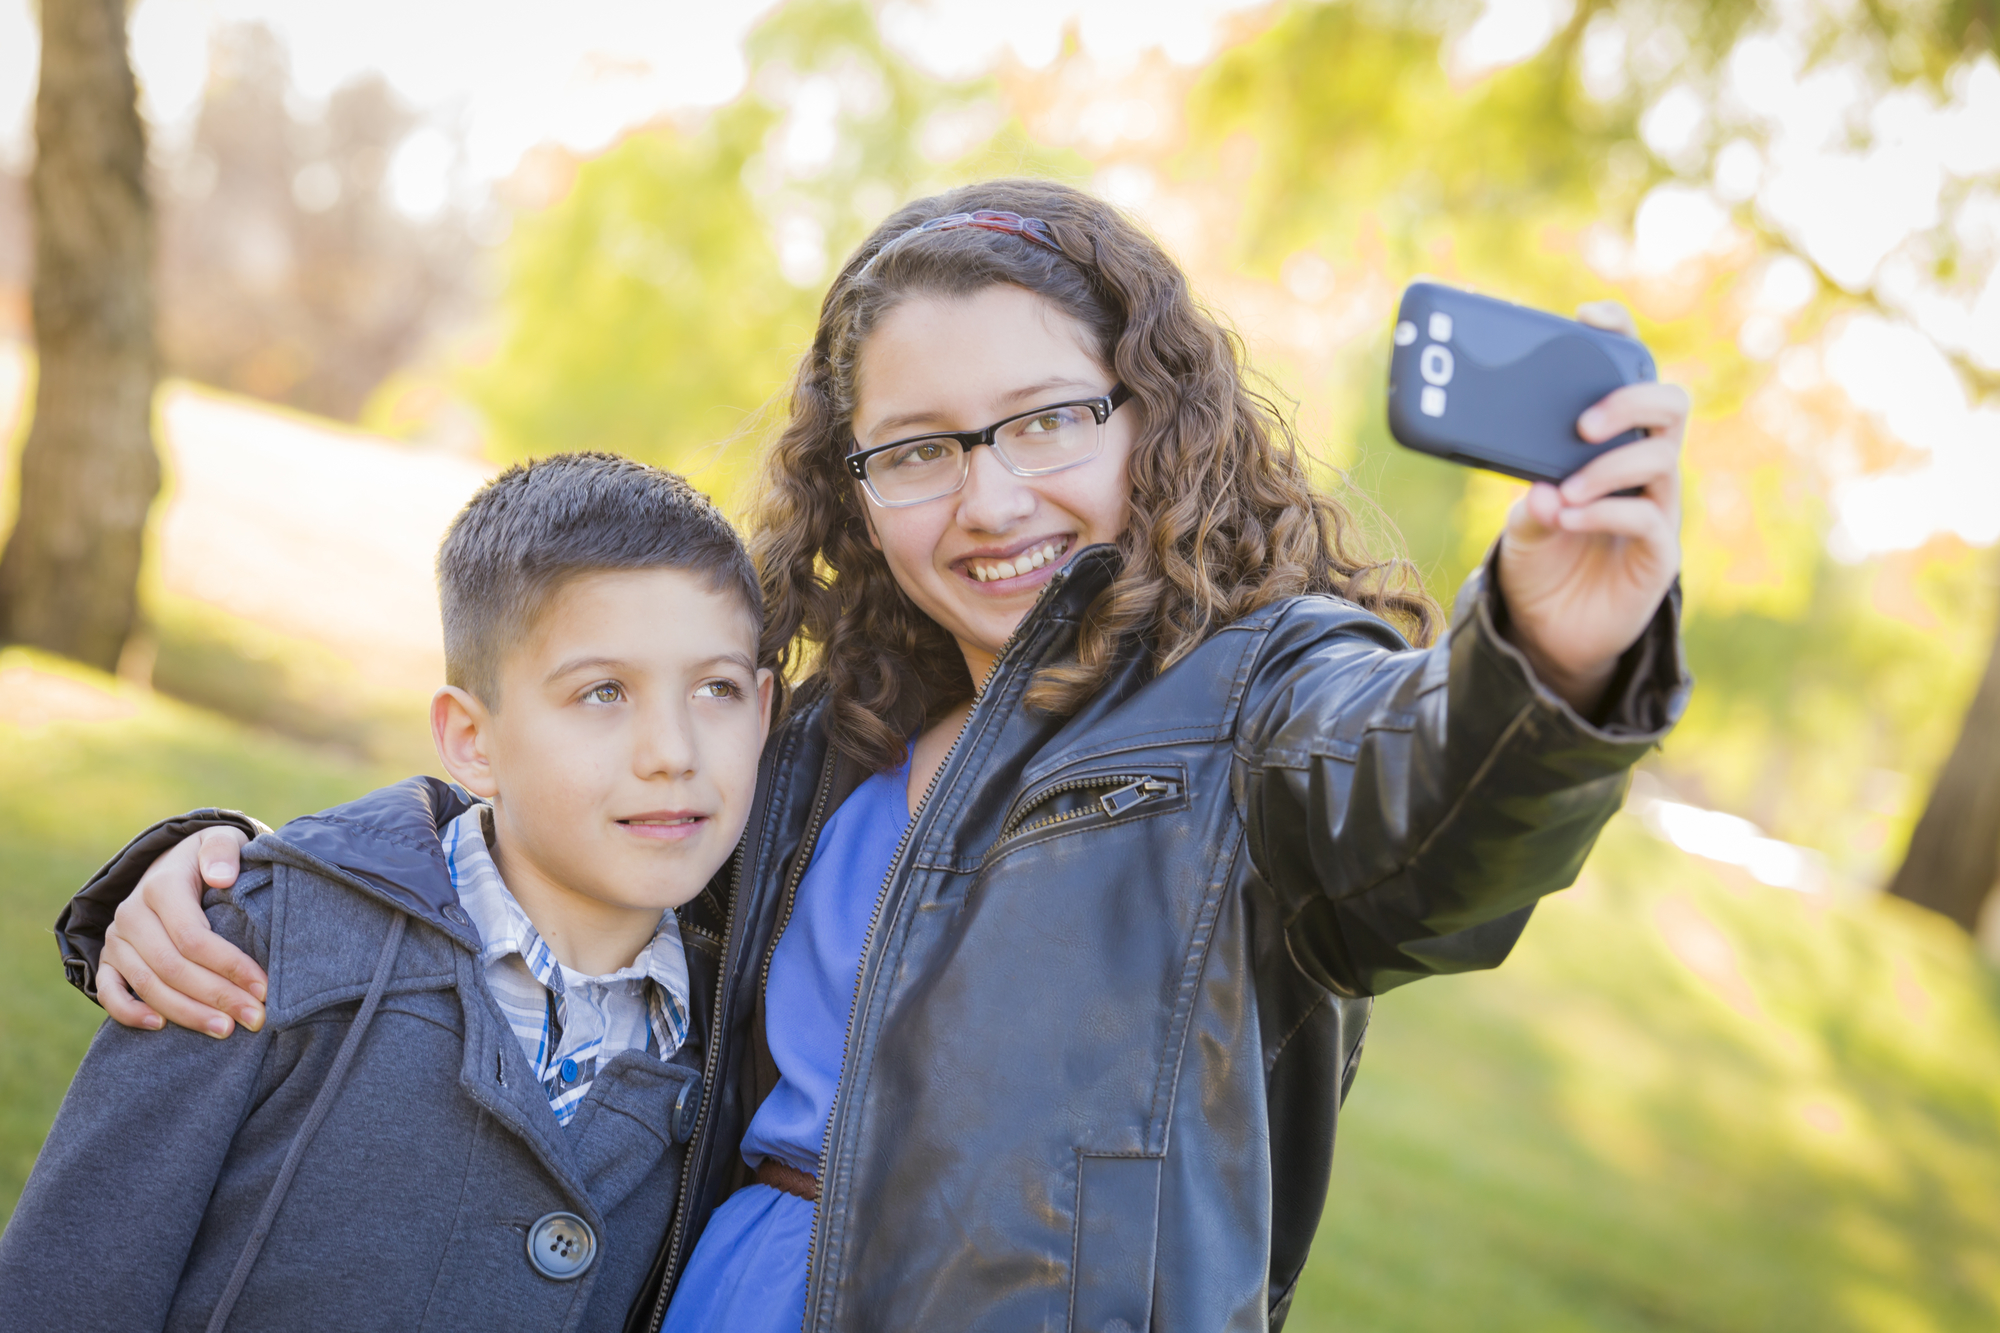 Brother and Sister Taking Cell Phone Picture of Themselves Outdoors At The Park.